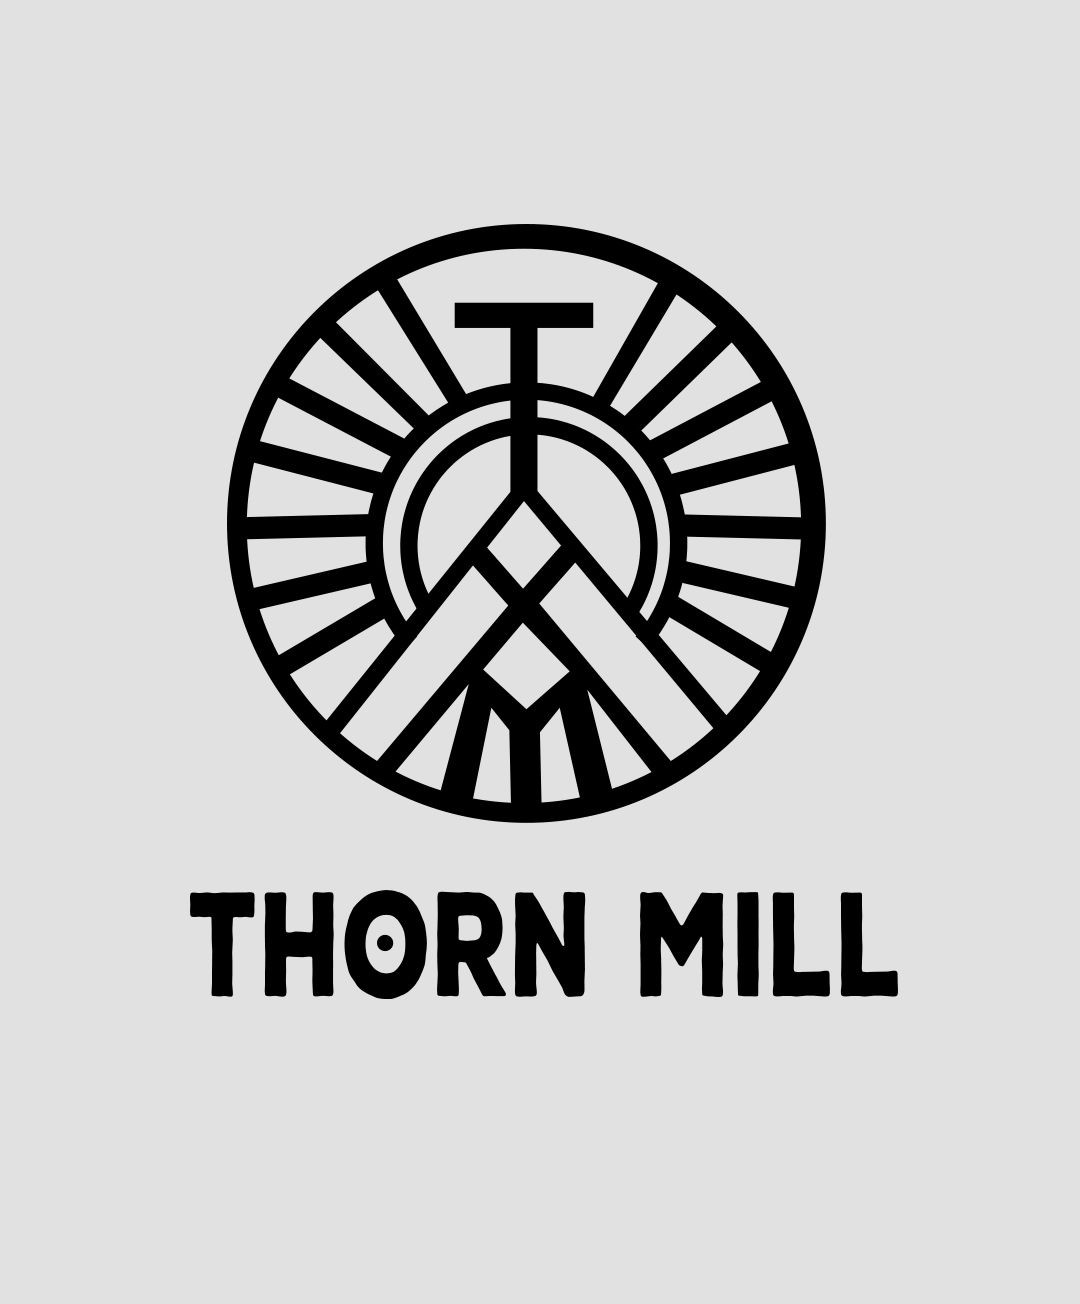 Thorn Mill